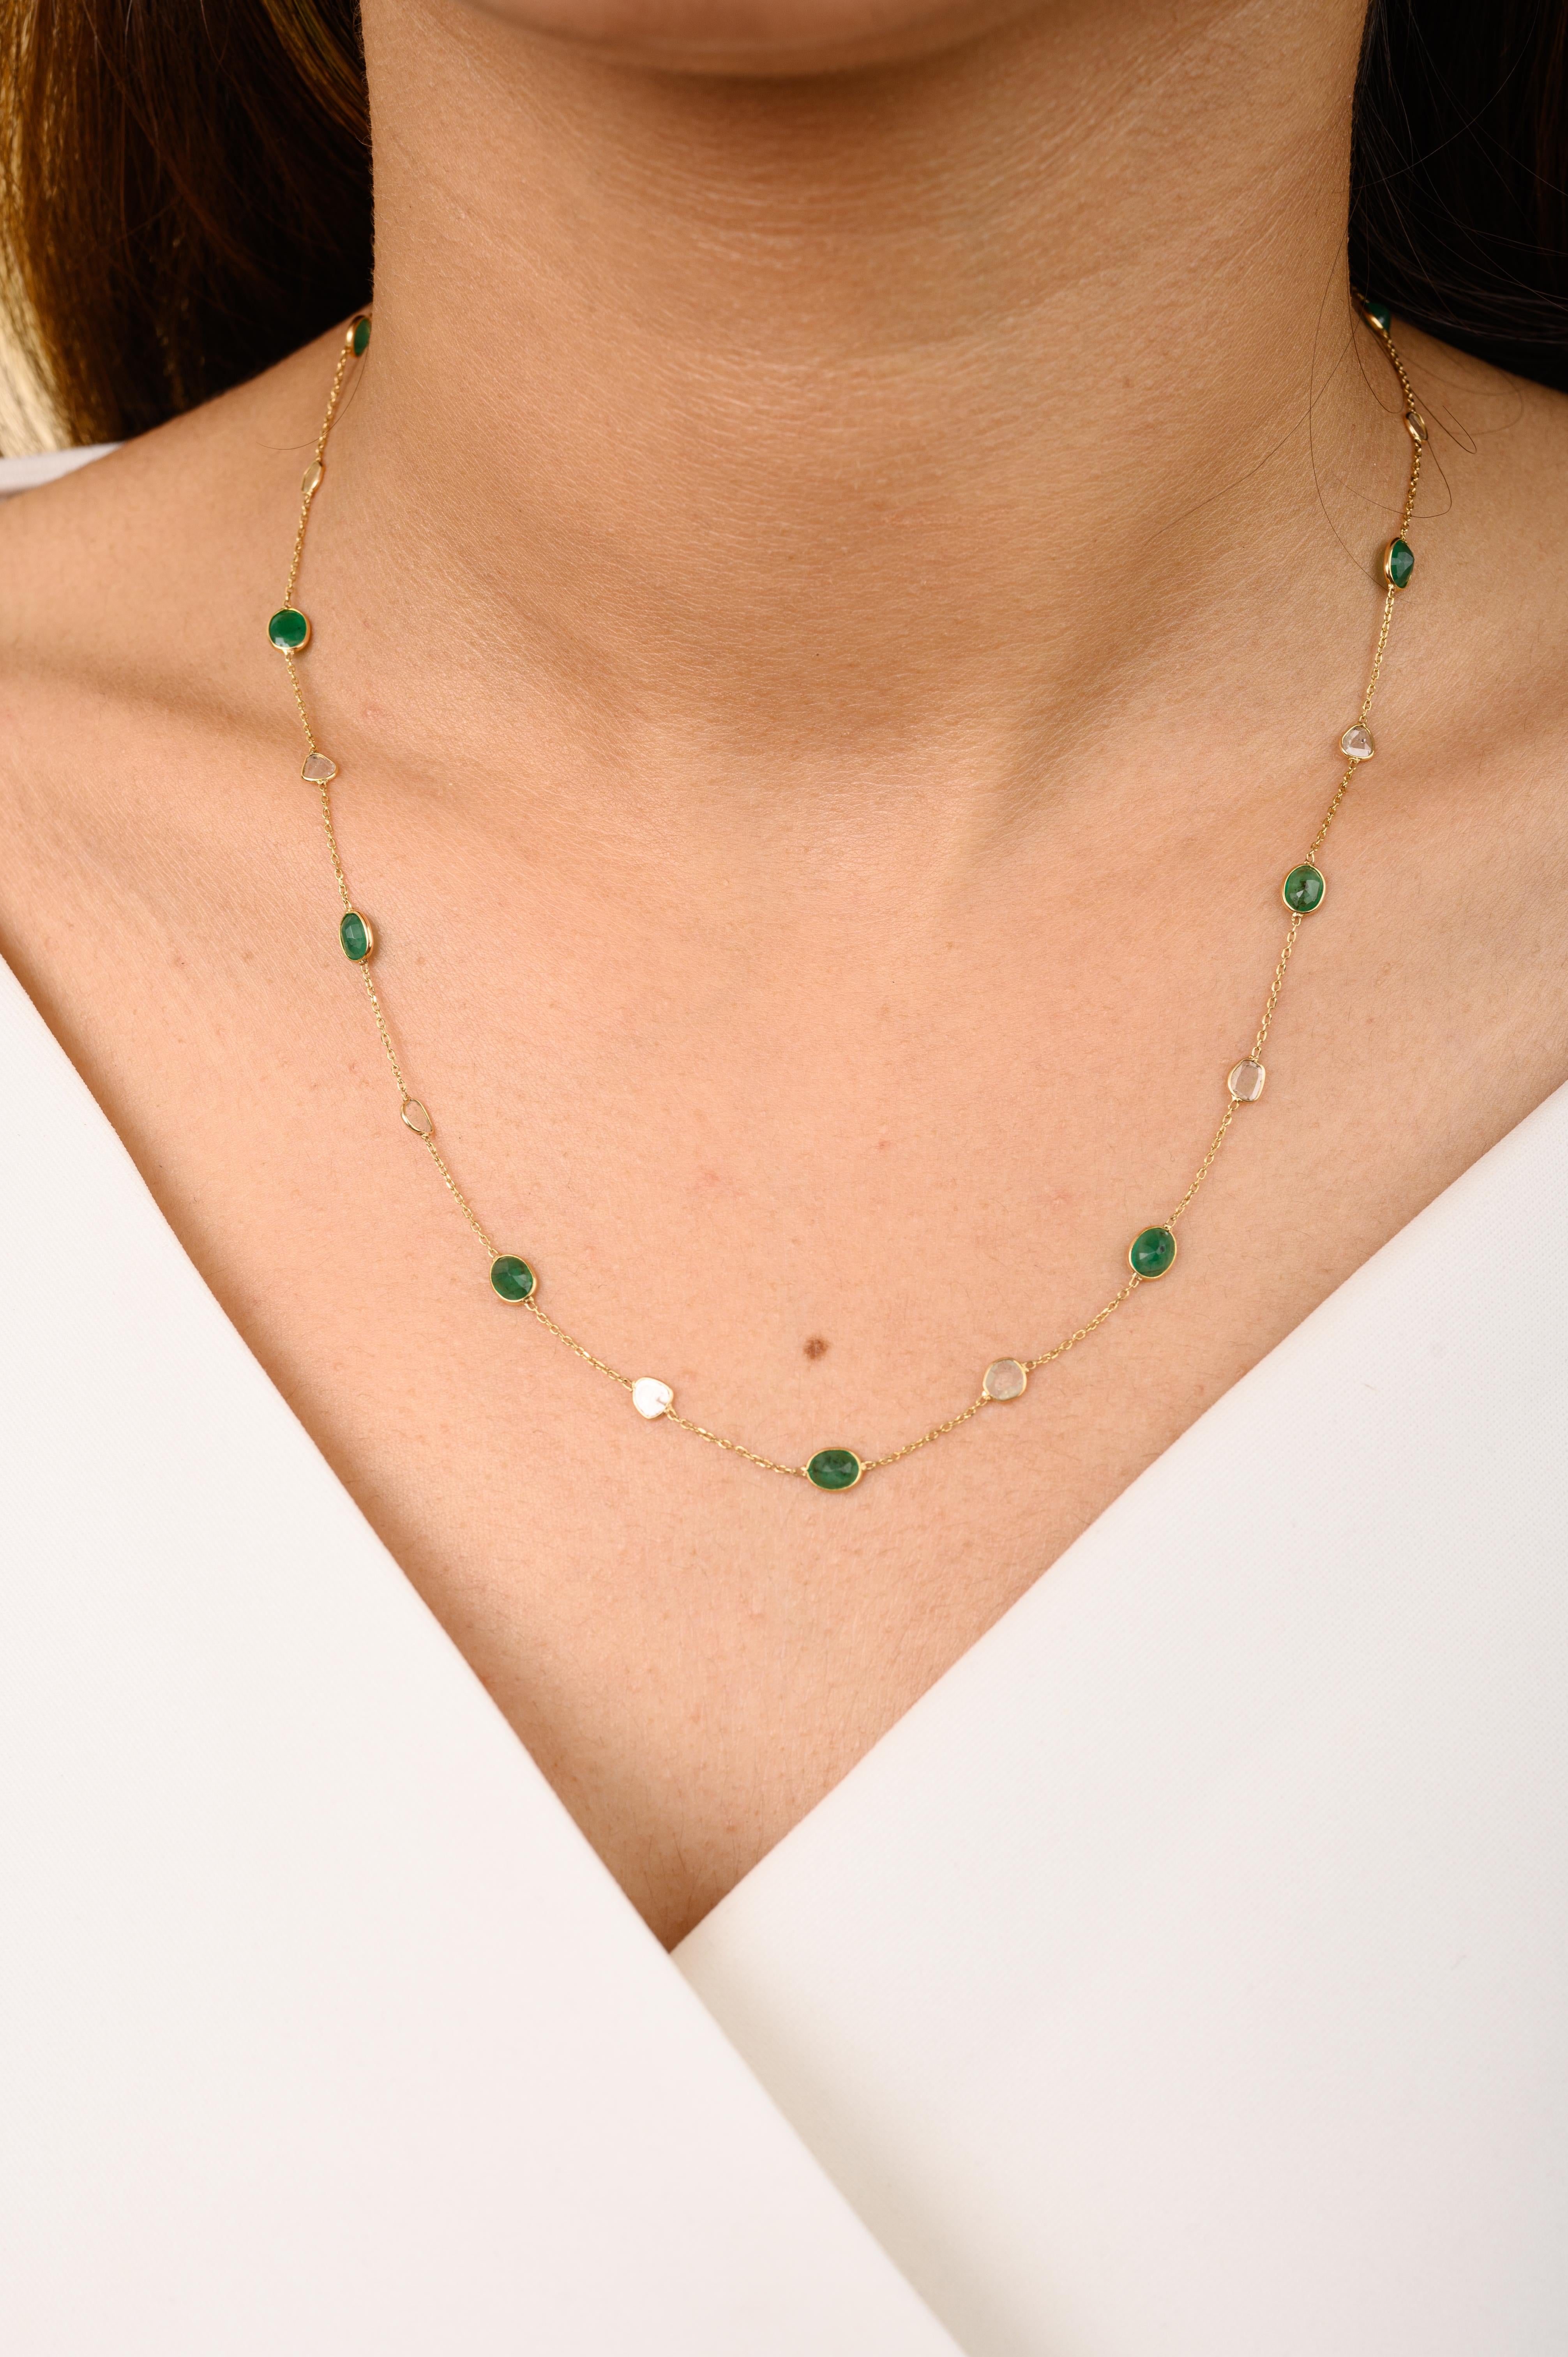 Natural Uncut Diamond and Emerald Station Necklace for Grandma in 18K Gold studded with oval cut emerald and uncut diamonds. This stunning piece of jewelry instantly elevates a casual look or dressy outfit. 
Emerald enhances the intellectual